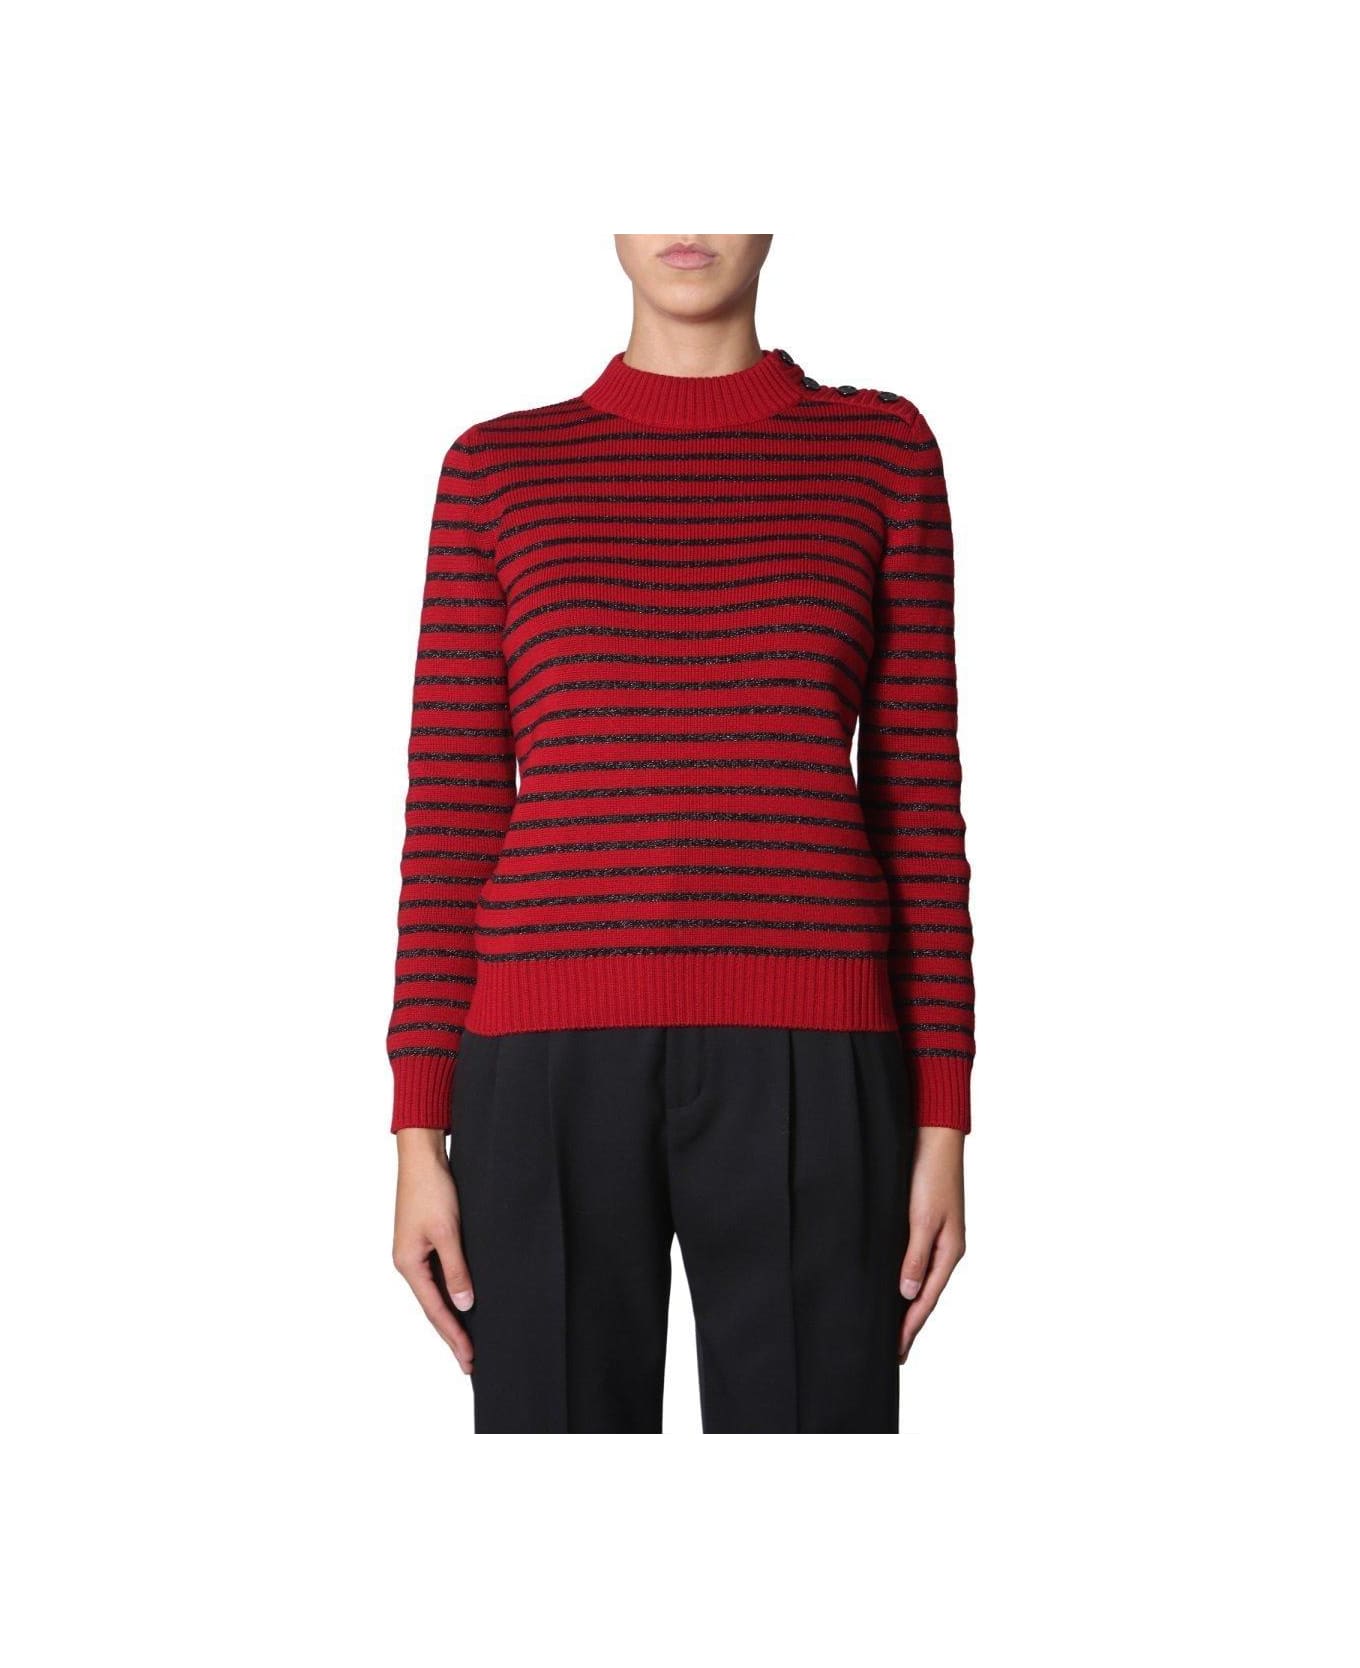 Saint Laurent Striped Knit Sweater - RED